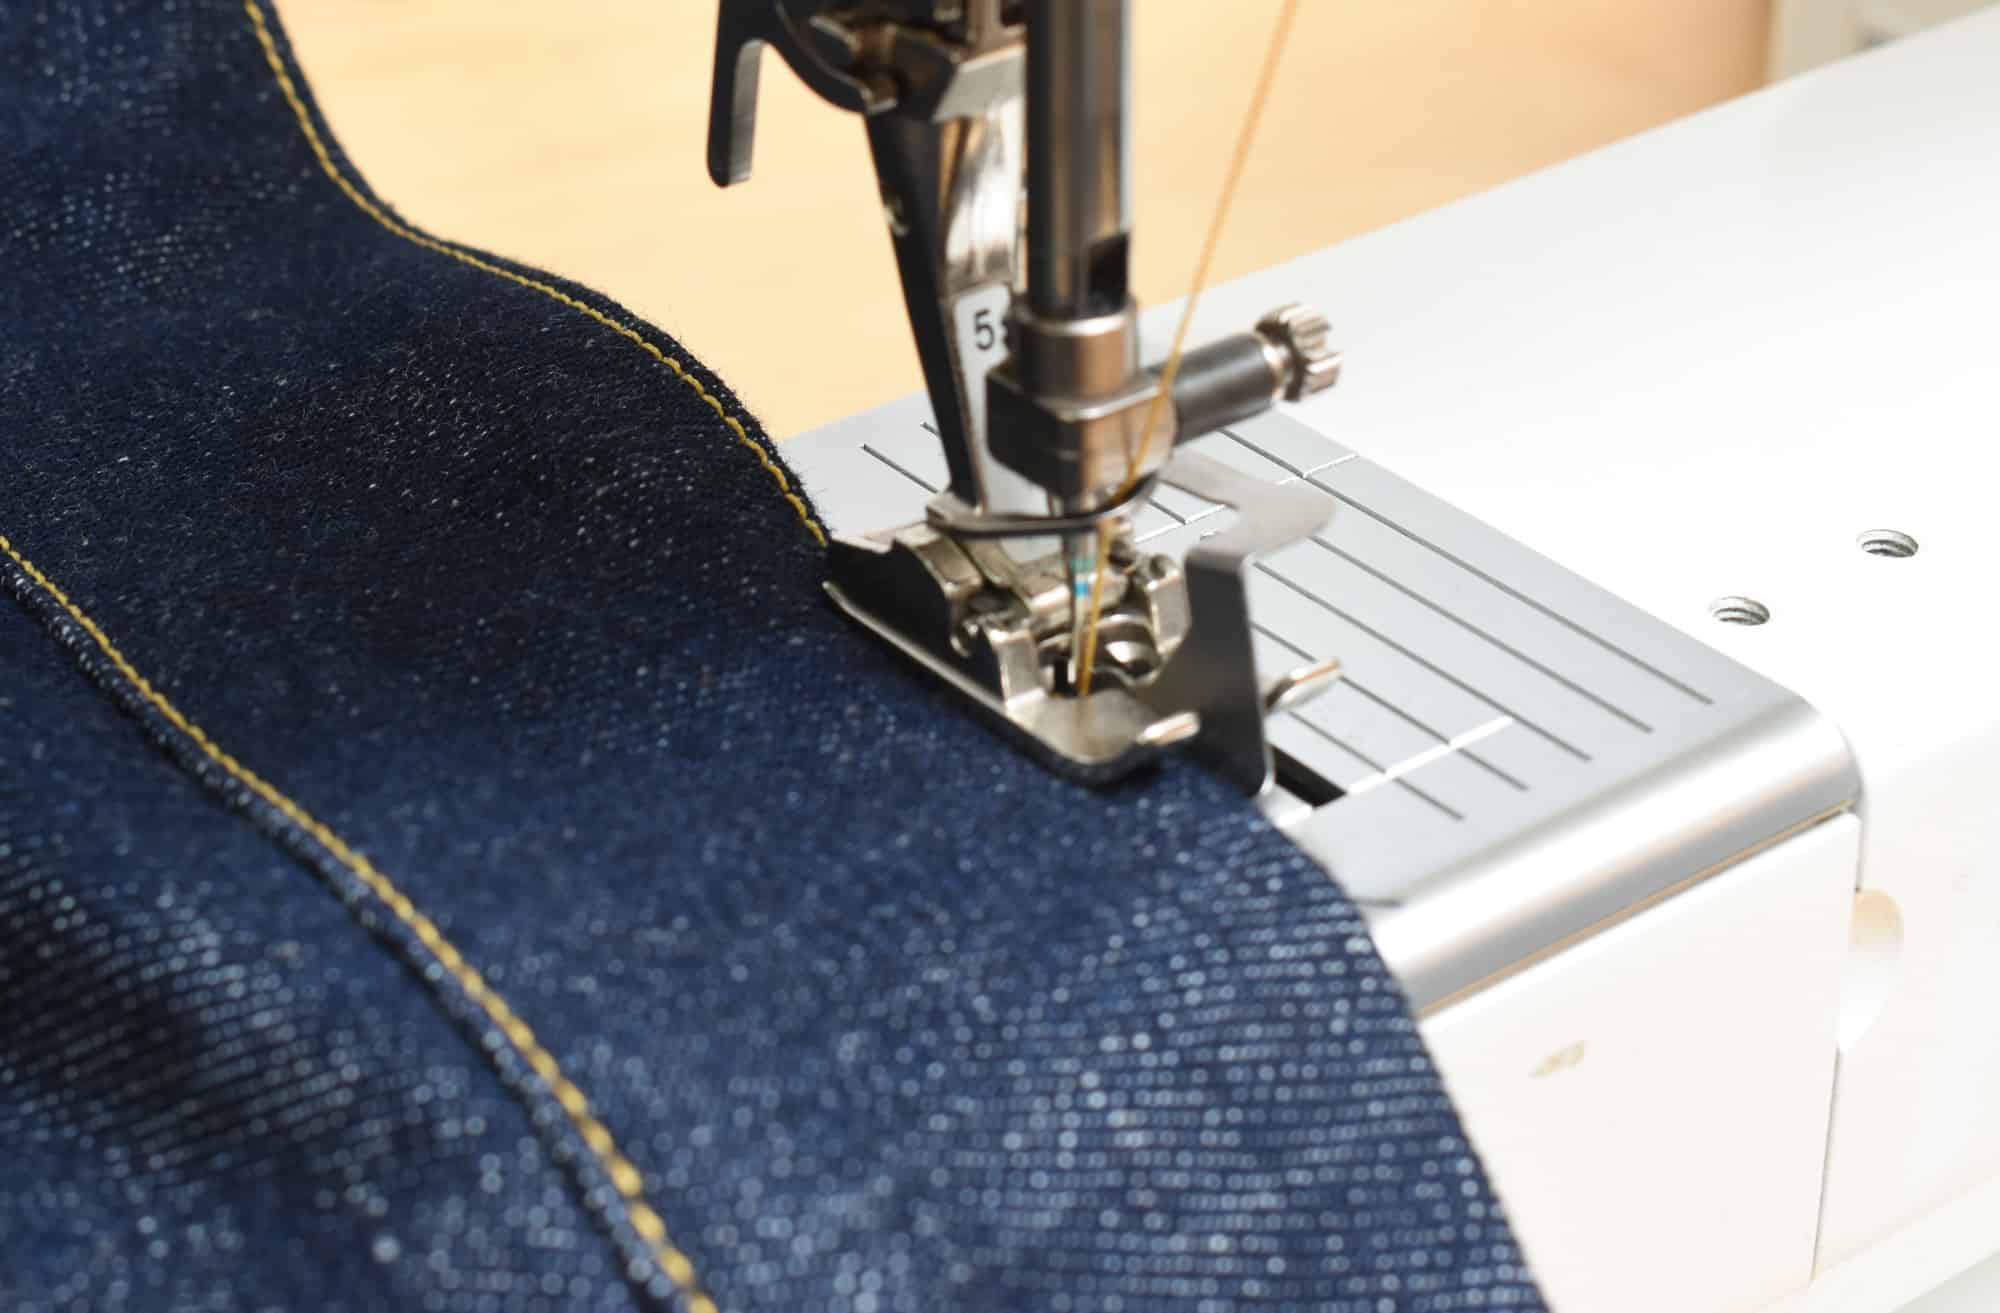 Sewing a jeans waistband tutorial